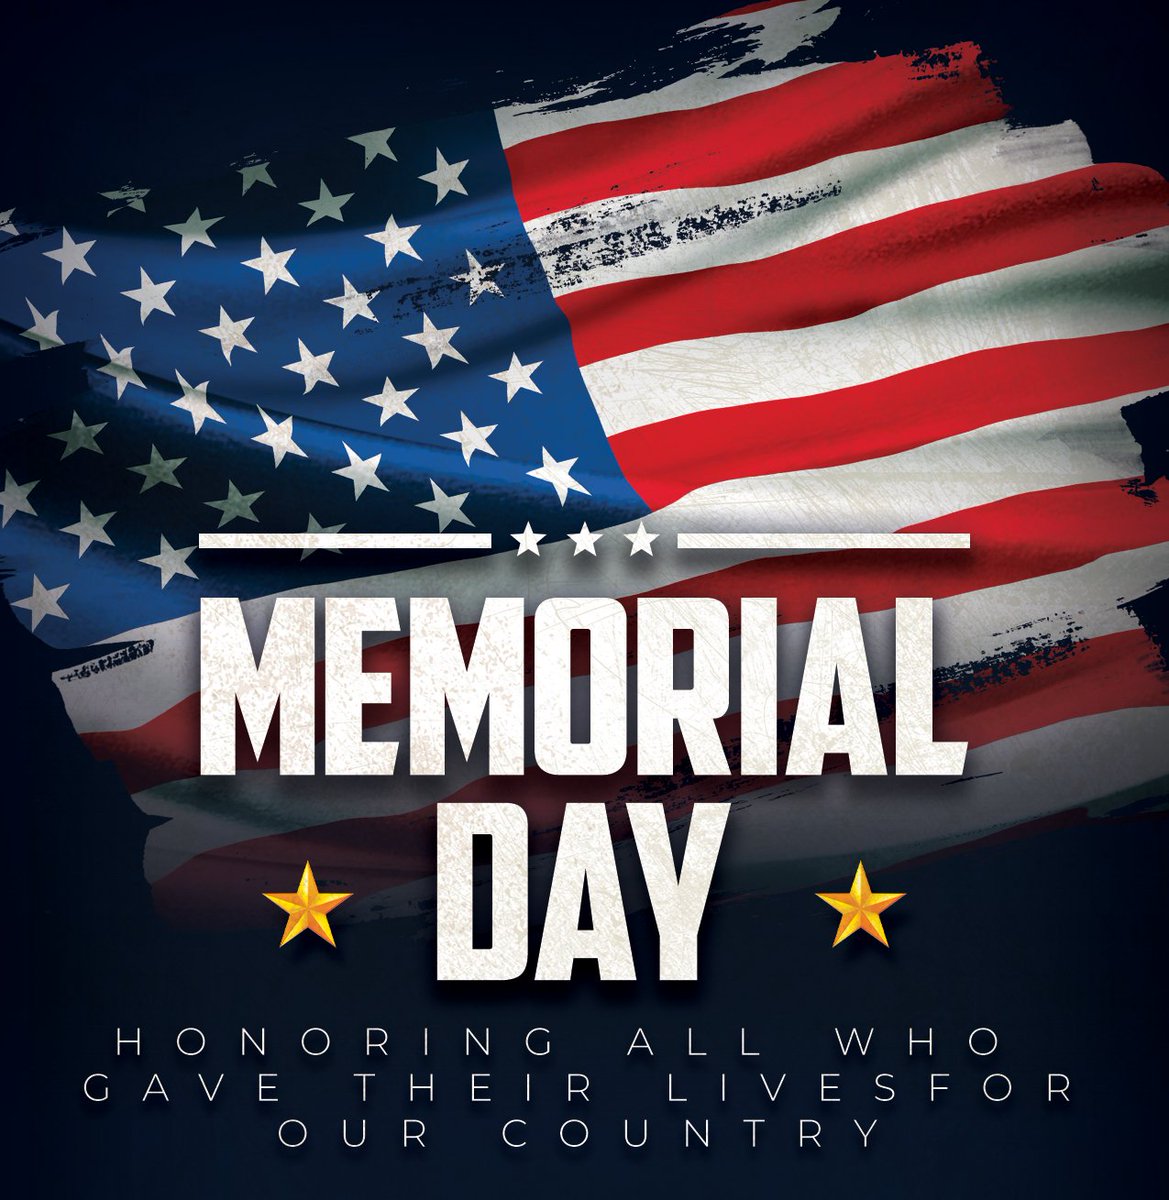 We honor all who gave their lives for our country and their families.  
"May we never forget our fallen comrades. Freedom isn't free." Sgt. Major Bill Paxton
We are thankful for their sacrifice. 

#Memorial_Day 